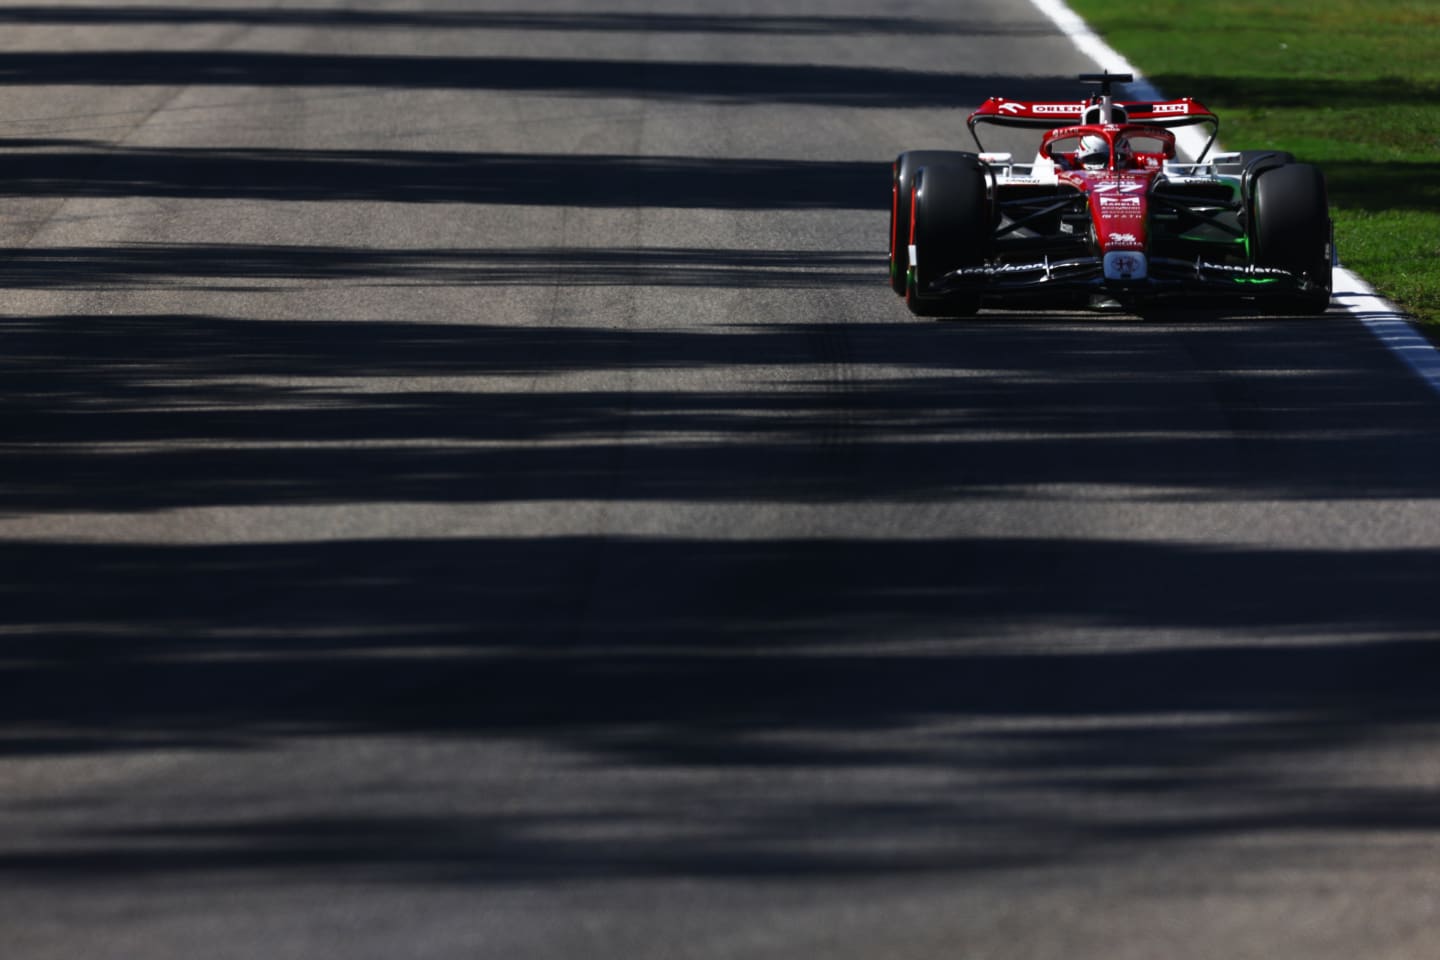 MONZA, ITALY - SEPTEMBER 10: Valtteri Bottas of Finland driving the (77) Alfa Romeo F1 C42 Ferrari on track during final practice ahead of the F1 Grand Prix of Italy at Autodromo Nazionale Monza on September 10, 2022 in Monza, Italy. (Photo by Mark Thompson/Getty Images)